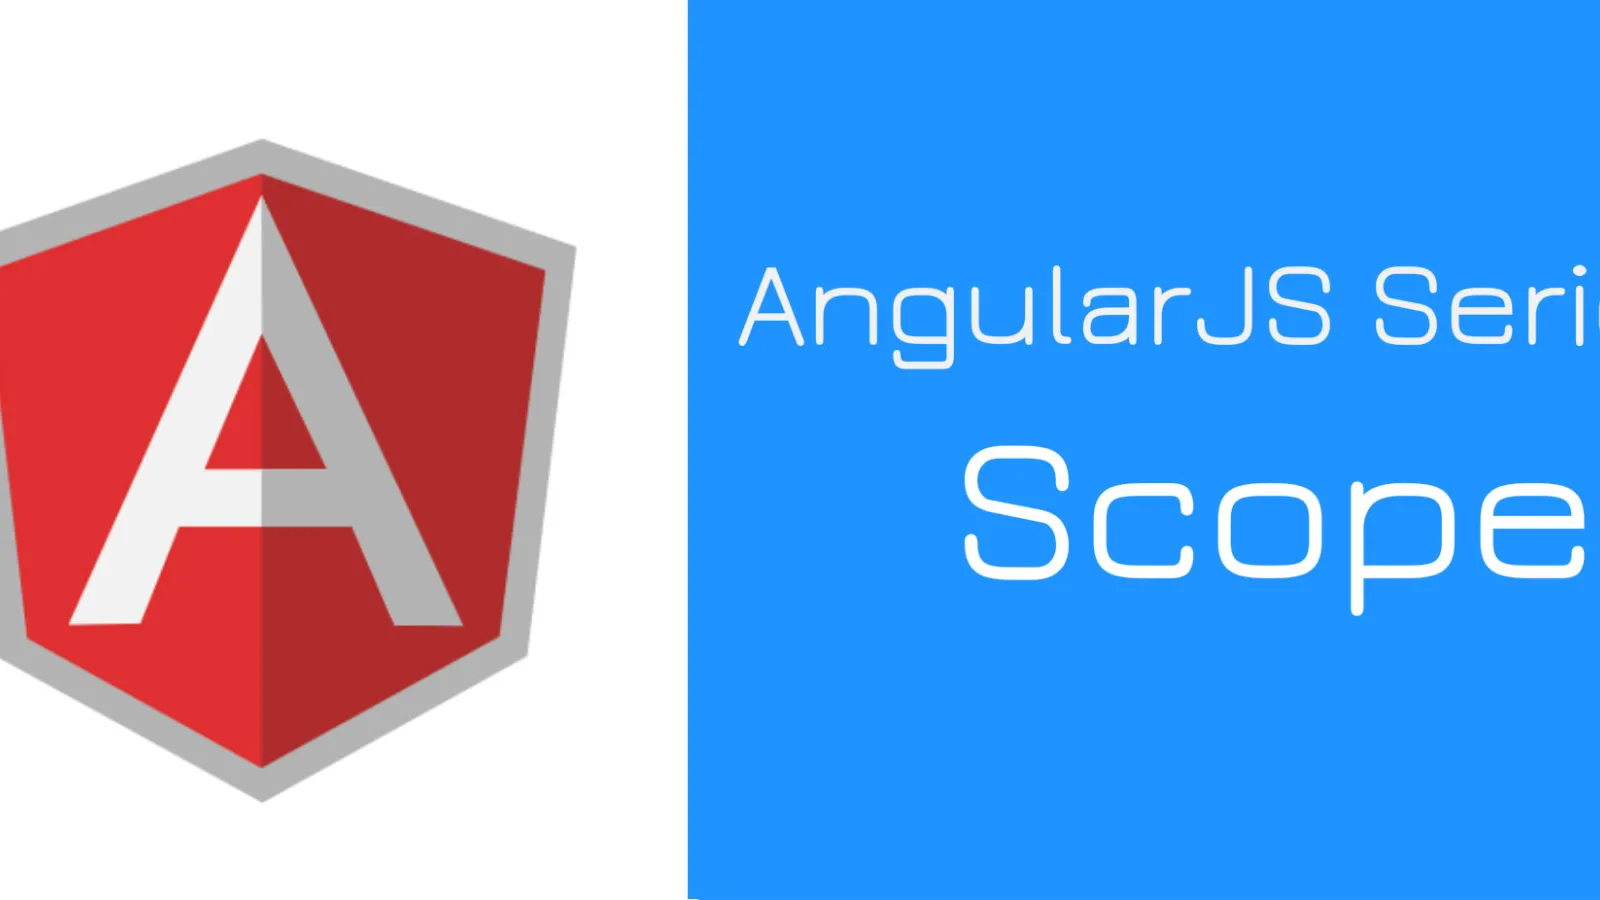 AngularJS Series: An introduction to Scope